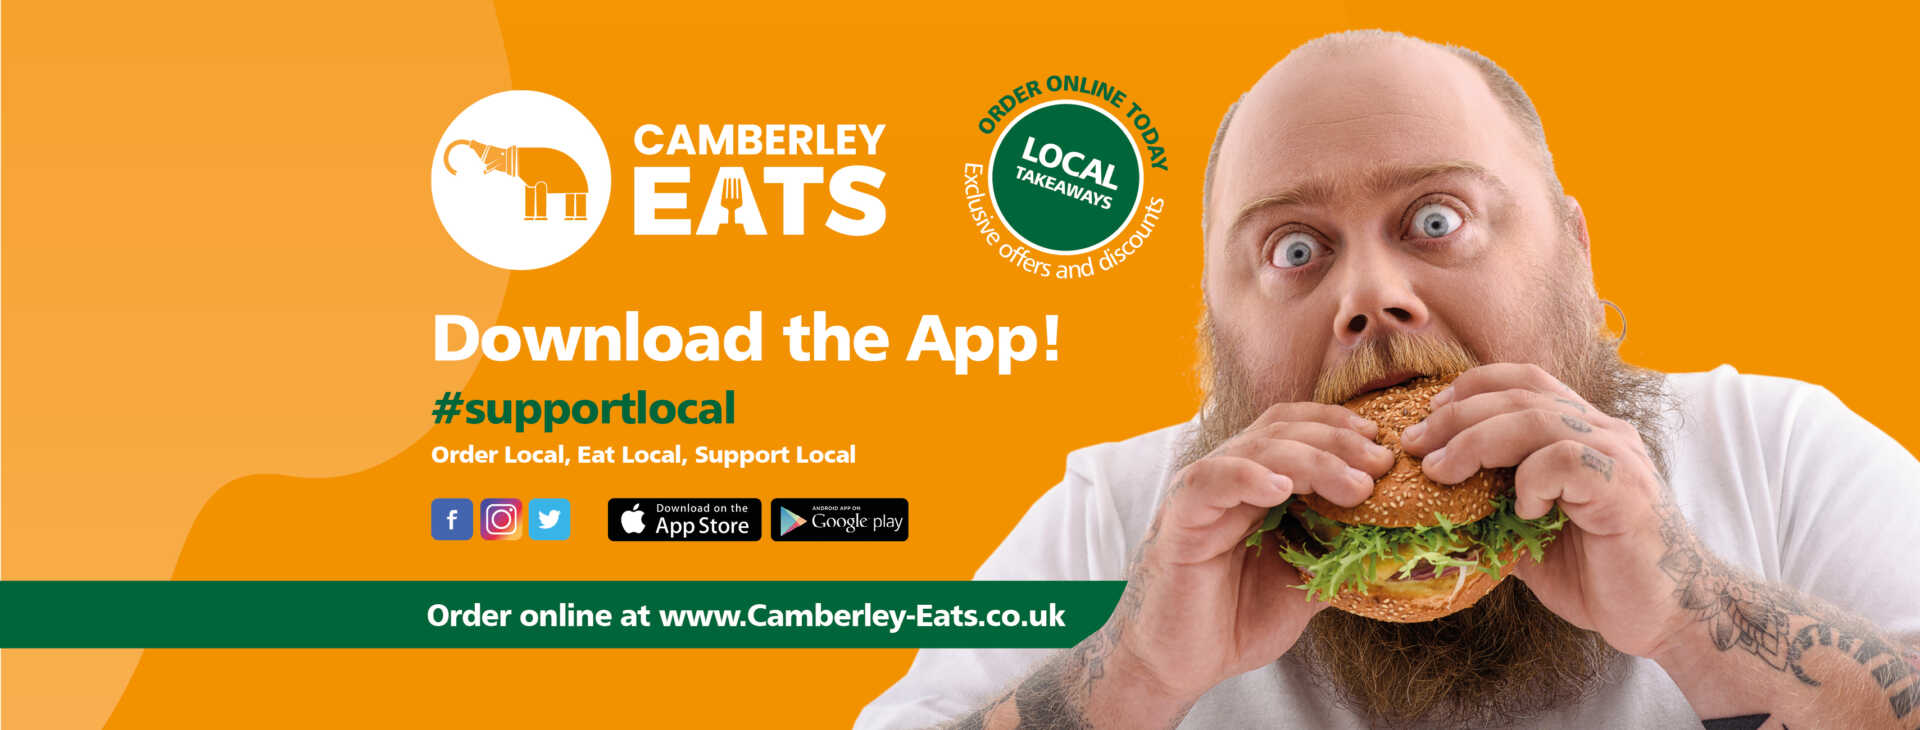 Camberley Eats  – The Local Food Ordering App-banner-image